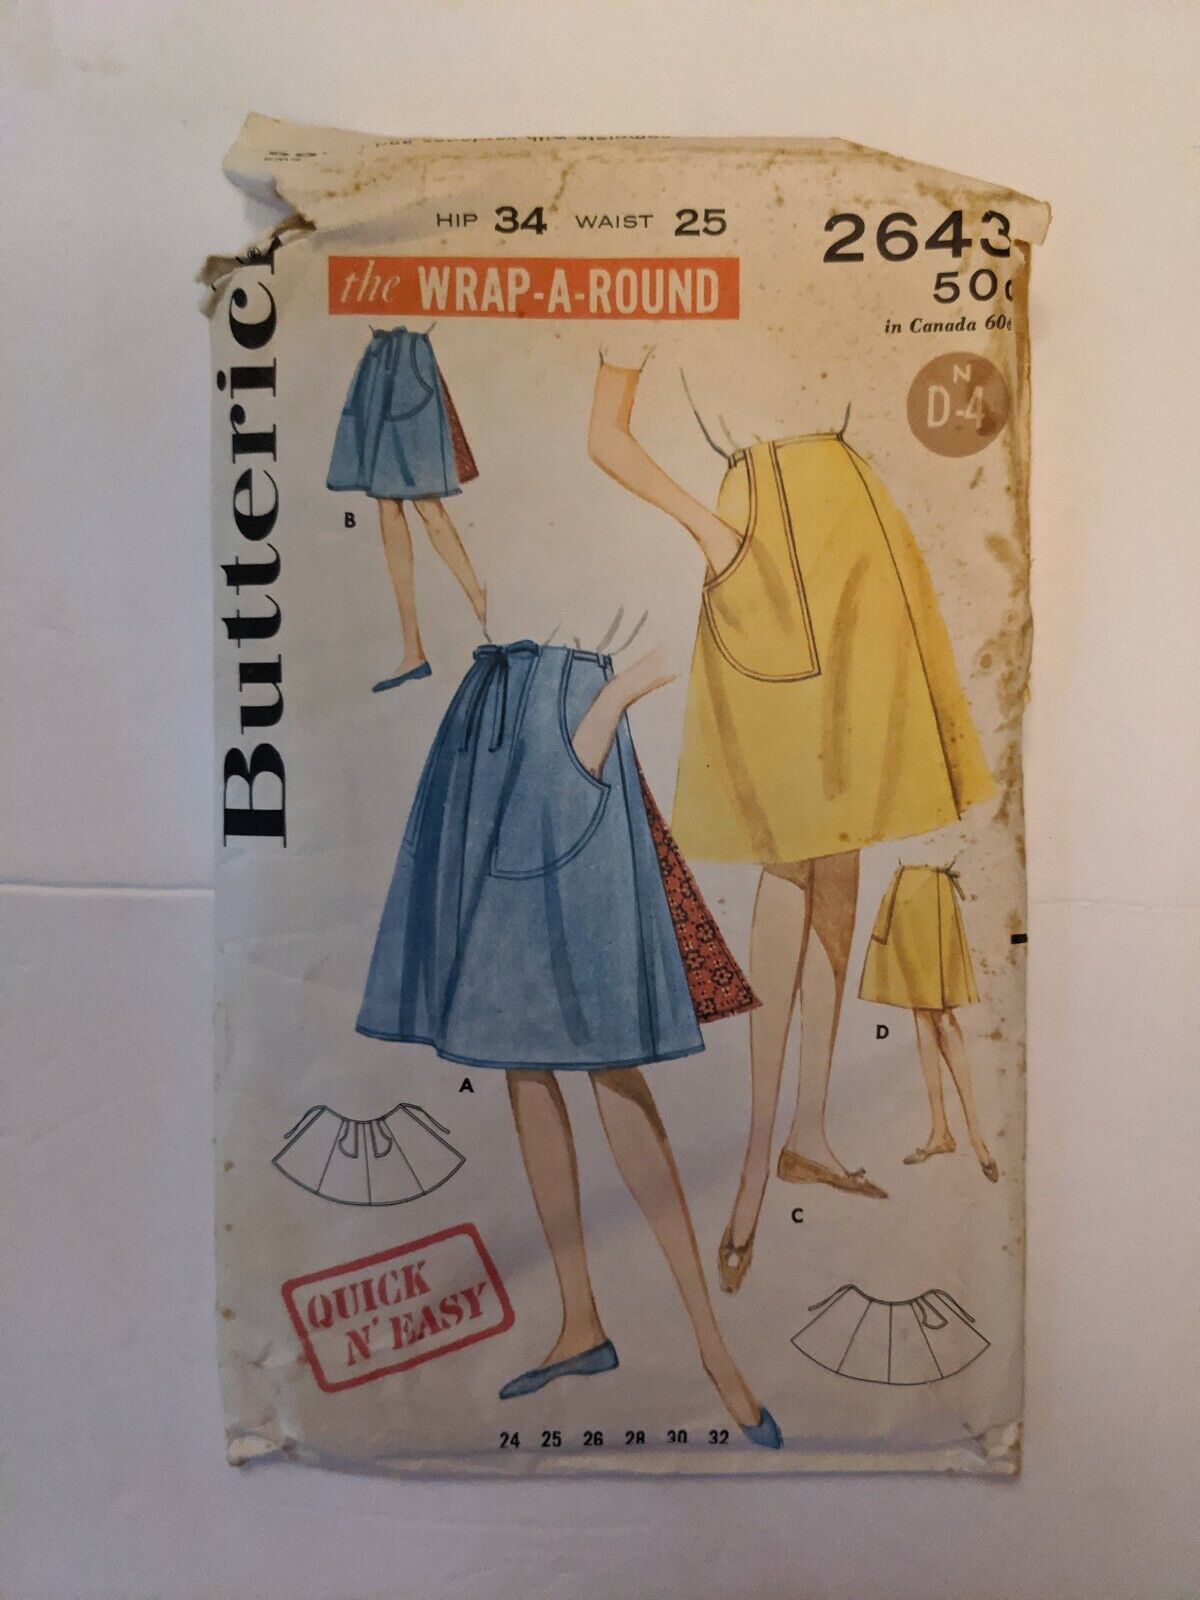  Vintage BUTTERICK 2643 Misses\' Quick N easy The Wrap a round hip 34 waist 25 